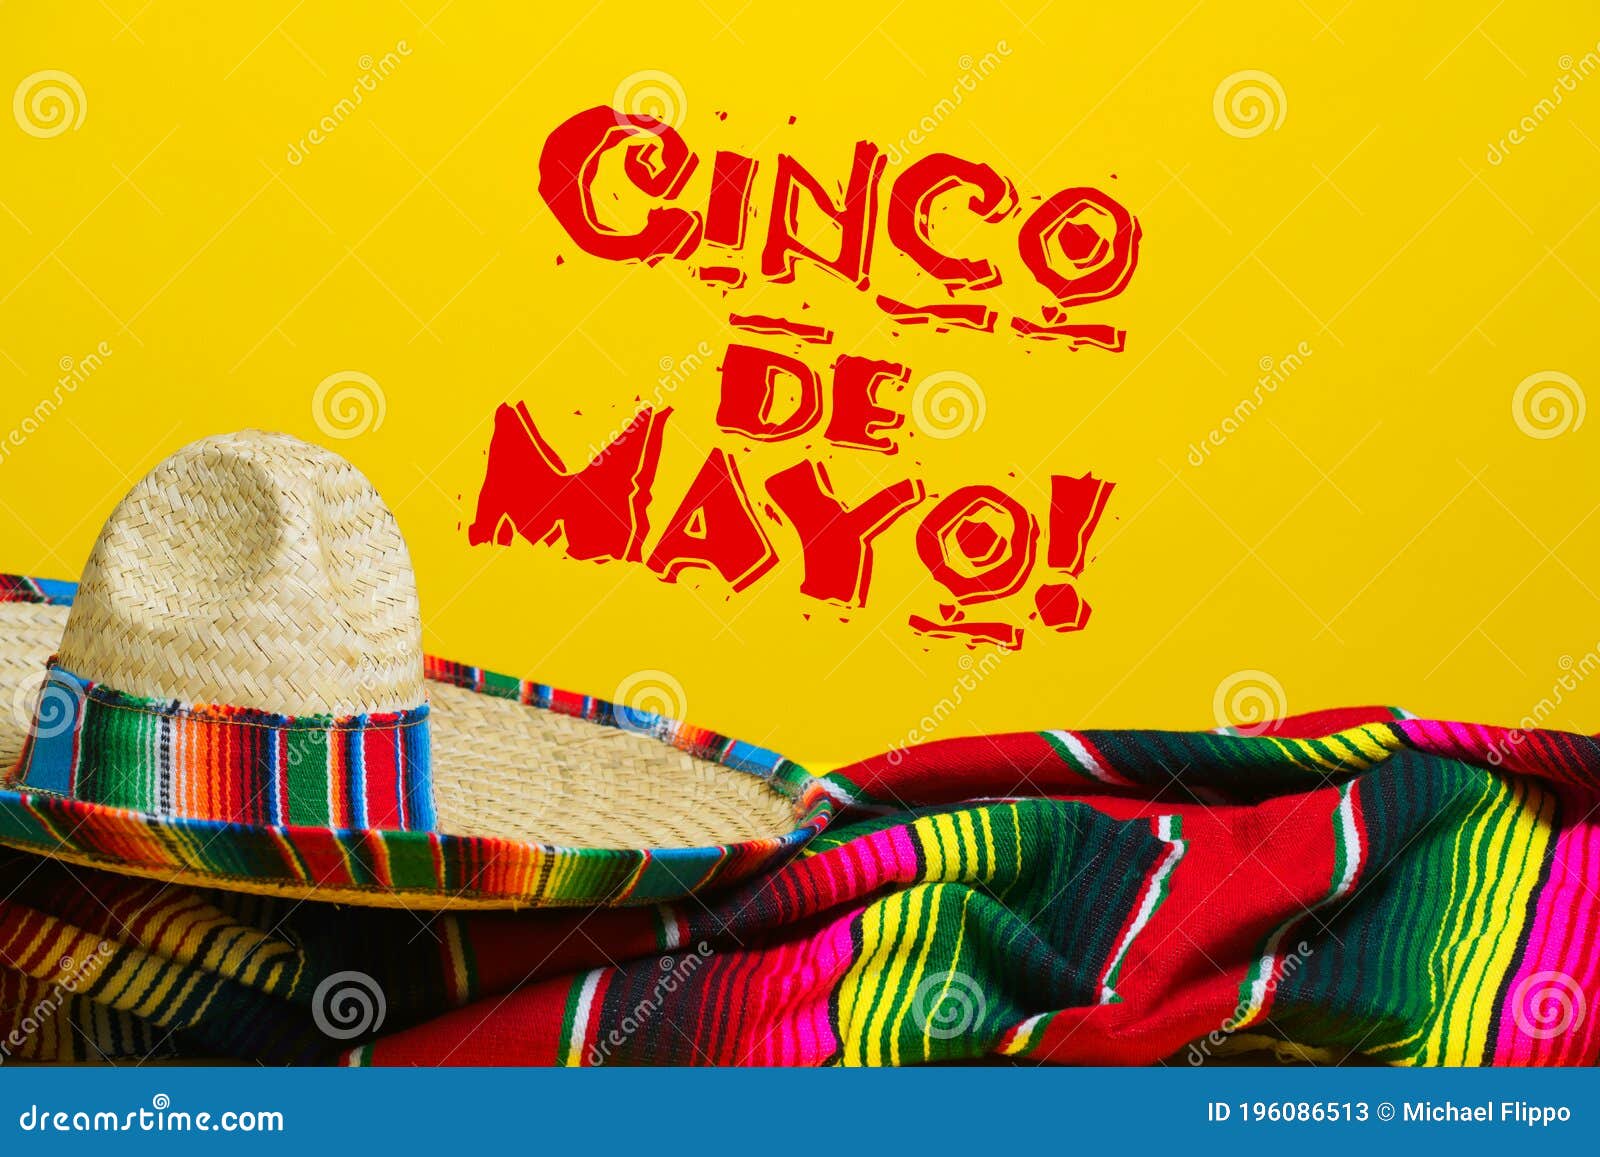 mexican serape blanket and sombrero on yellow background with cinco de mayo.